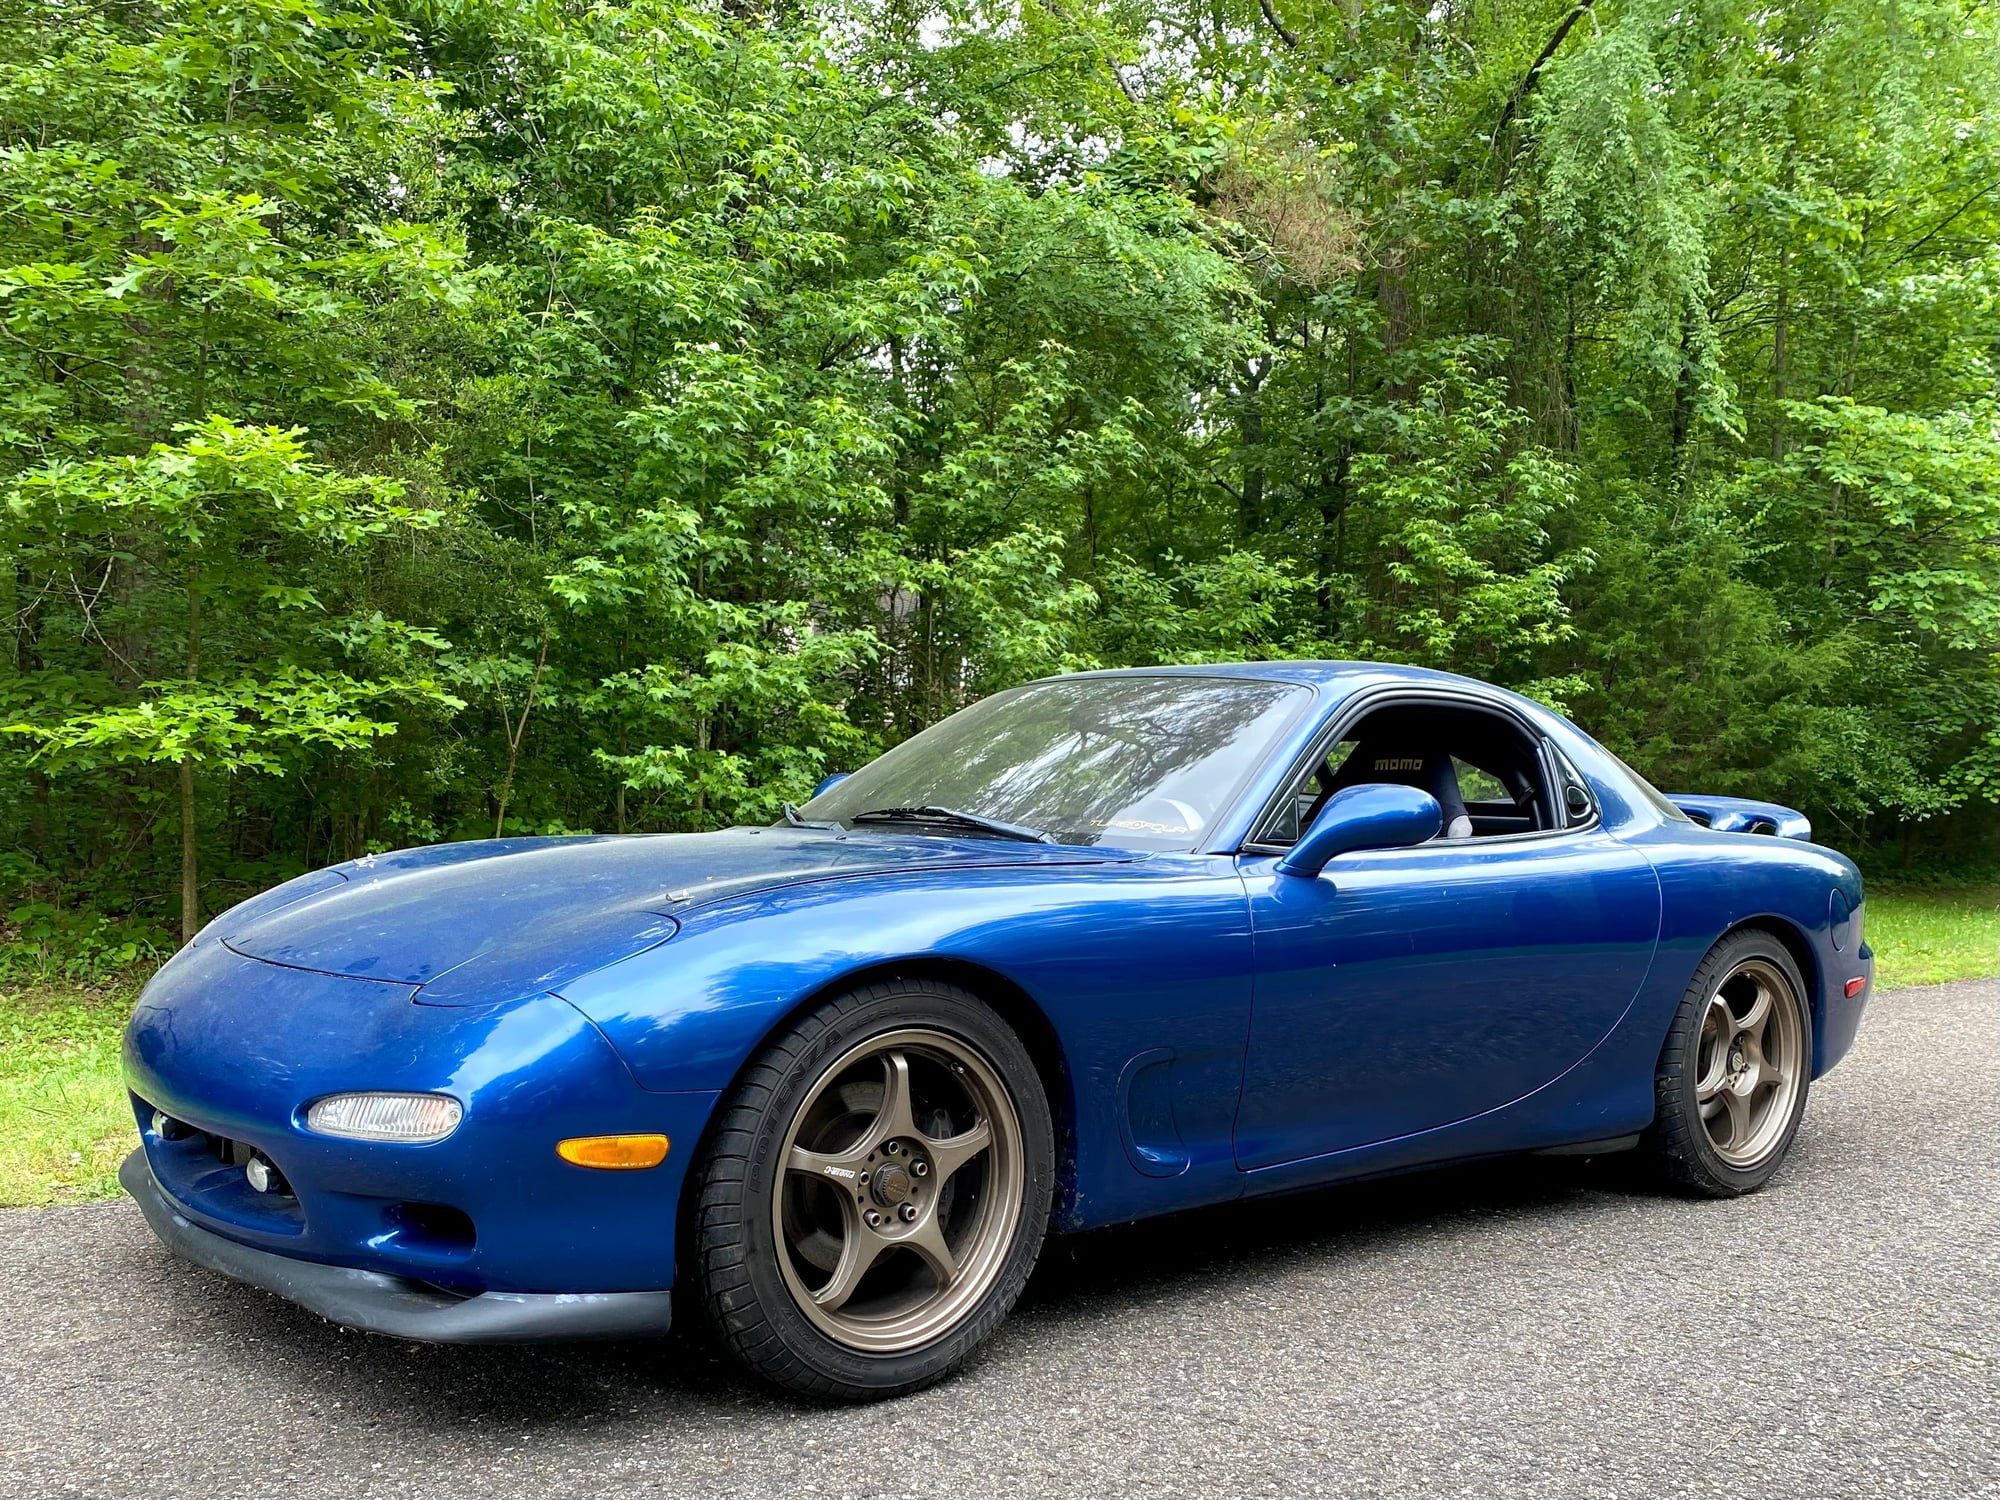 1993 Mazda RX-7 - FS in AL: Sweet 93 R1 w/ Tons of Old School Upgrades in Need of a Refresh - Used - VIN JM1FD3319P0206142 - 84,700 Miles - Manual - Coupe - Blue - Elkmont, AL 35620, United States